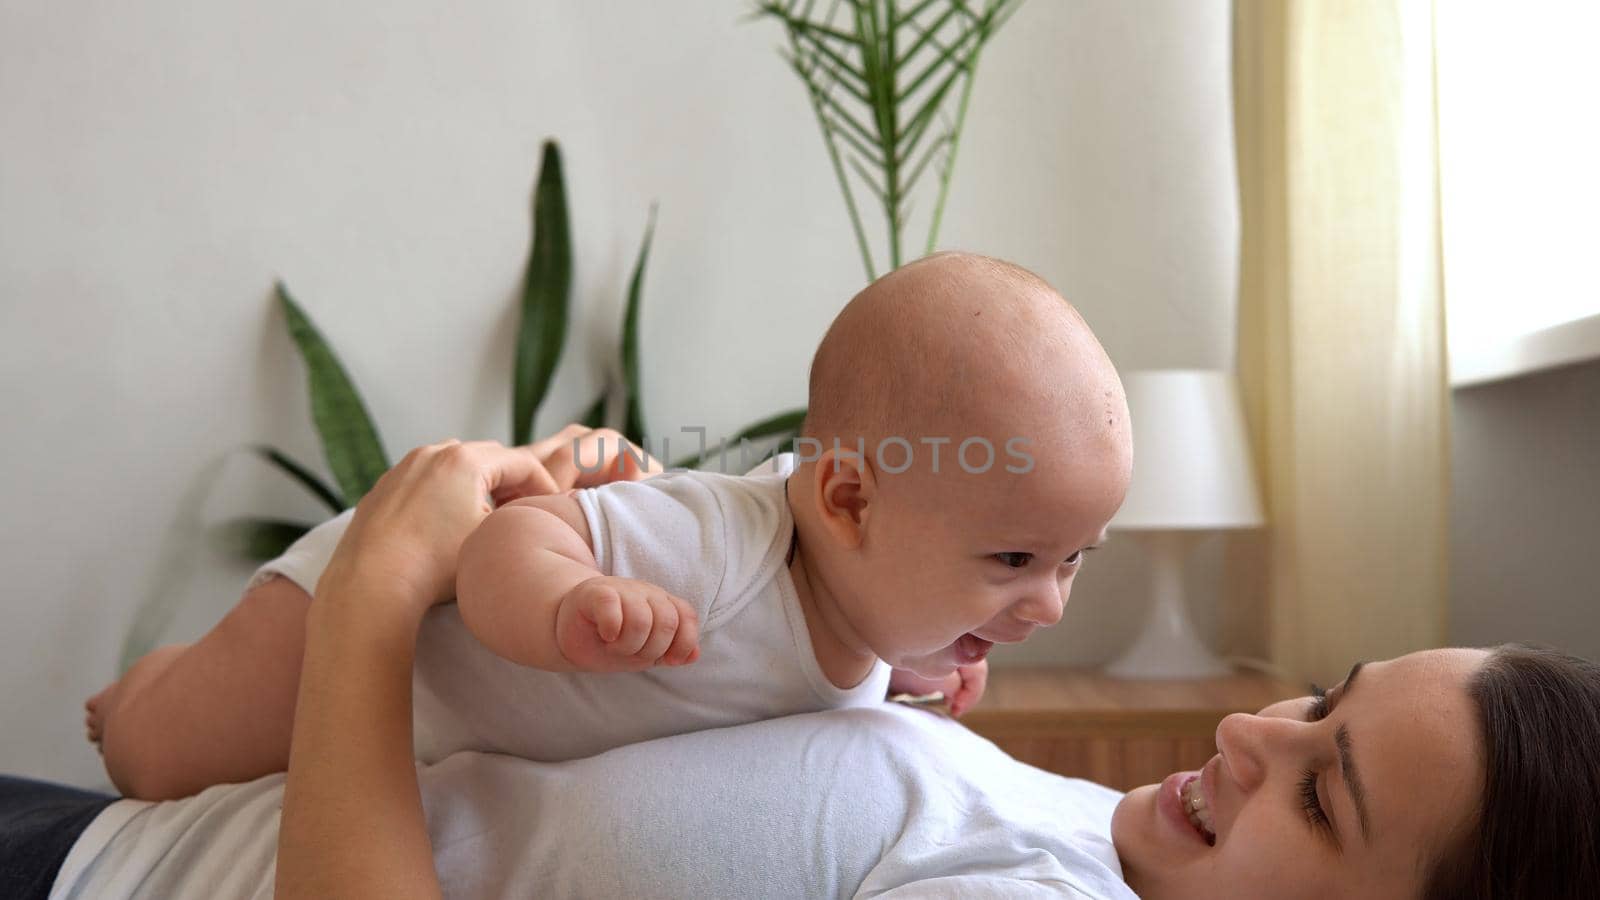 Authentic Young Caucasian Woman Holding Newborn Baby. Mom And Child On Bed. Close-up Portrait of Smiling Family With Infant On Hands. Happy Marriage Couple On Background. Childhood, Parenthood Concept by mytrykau